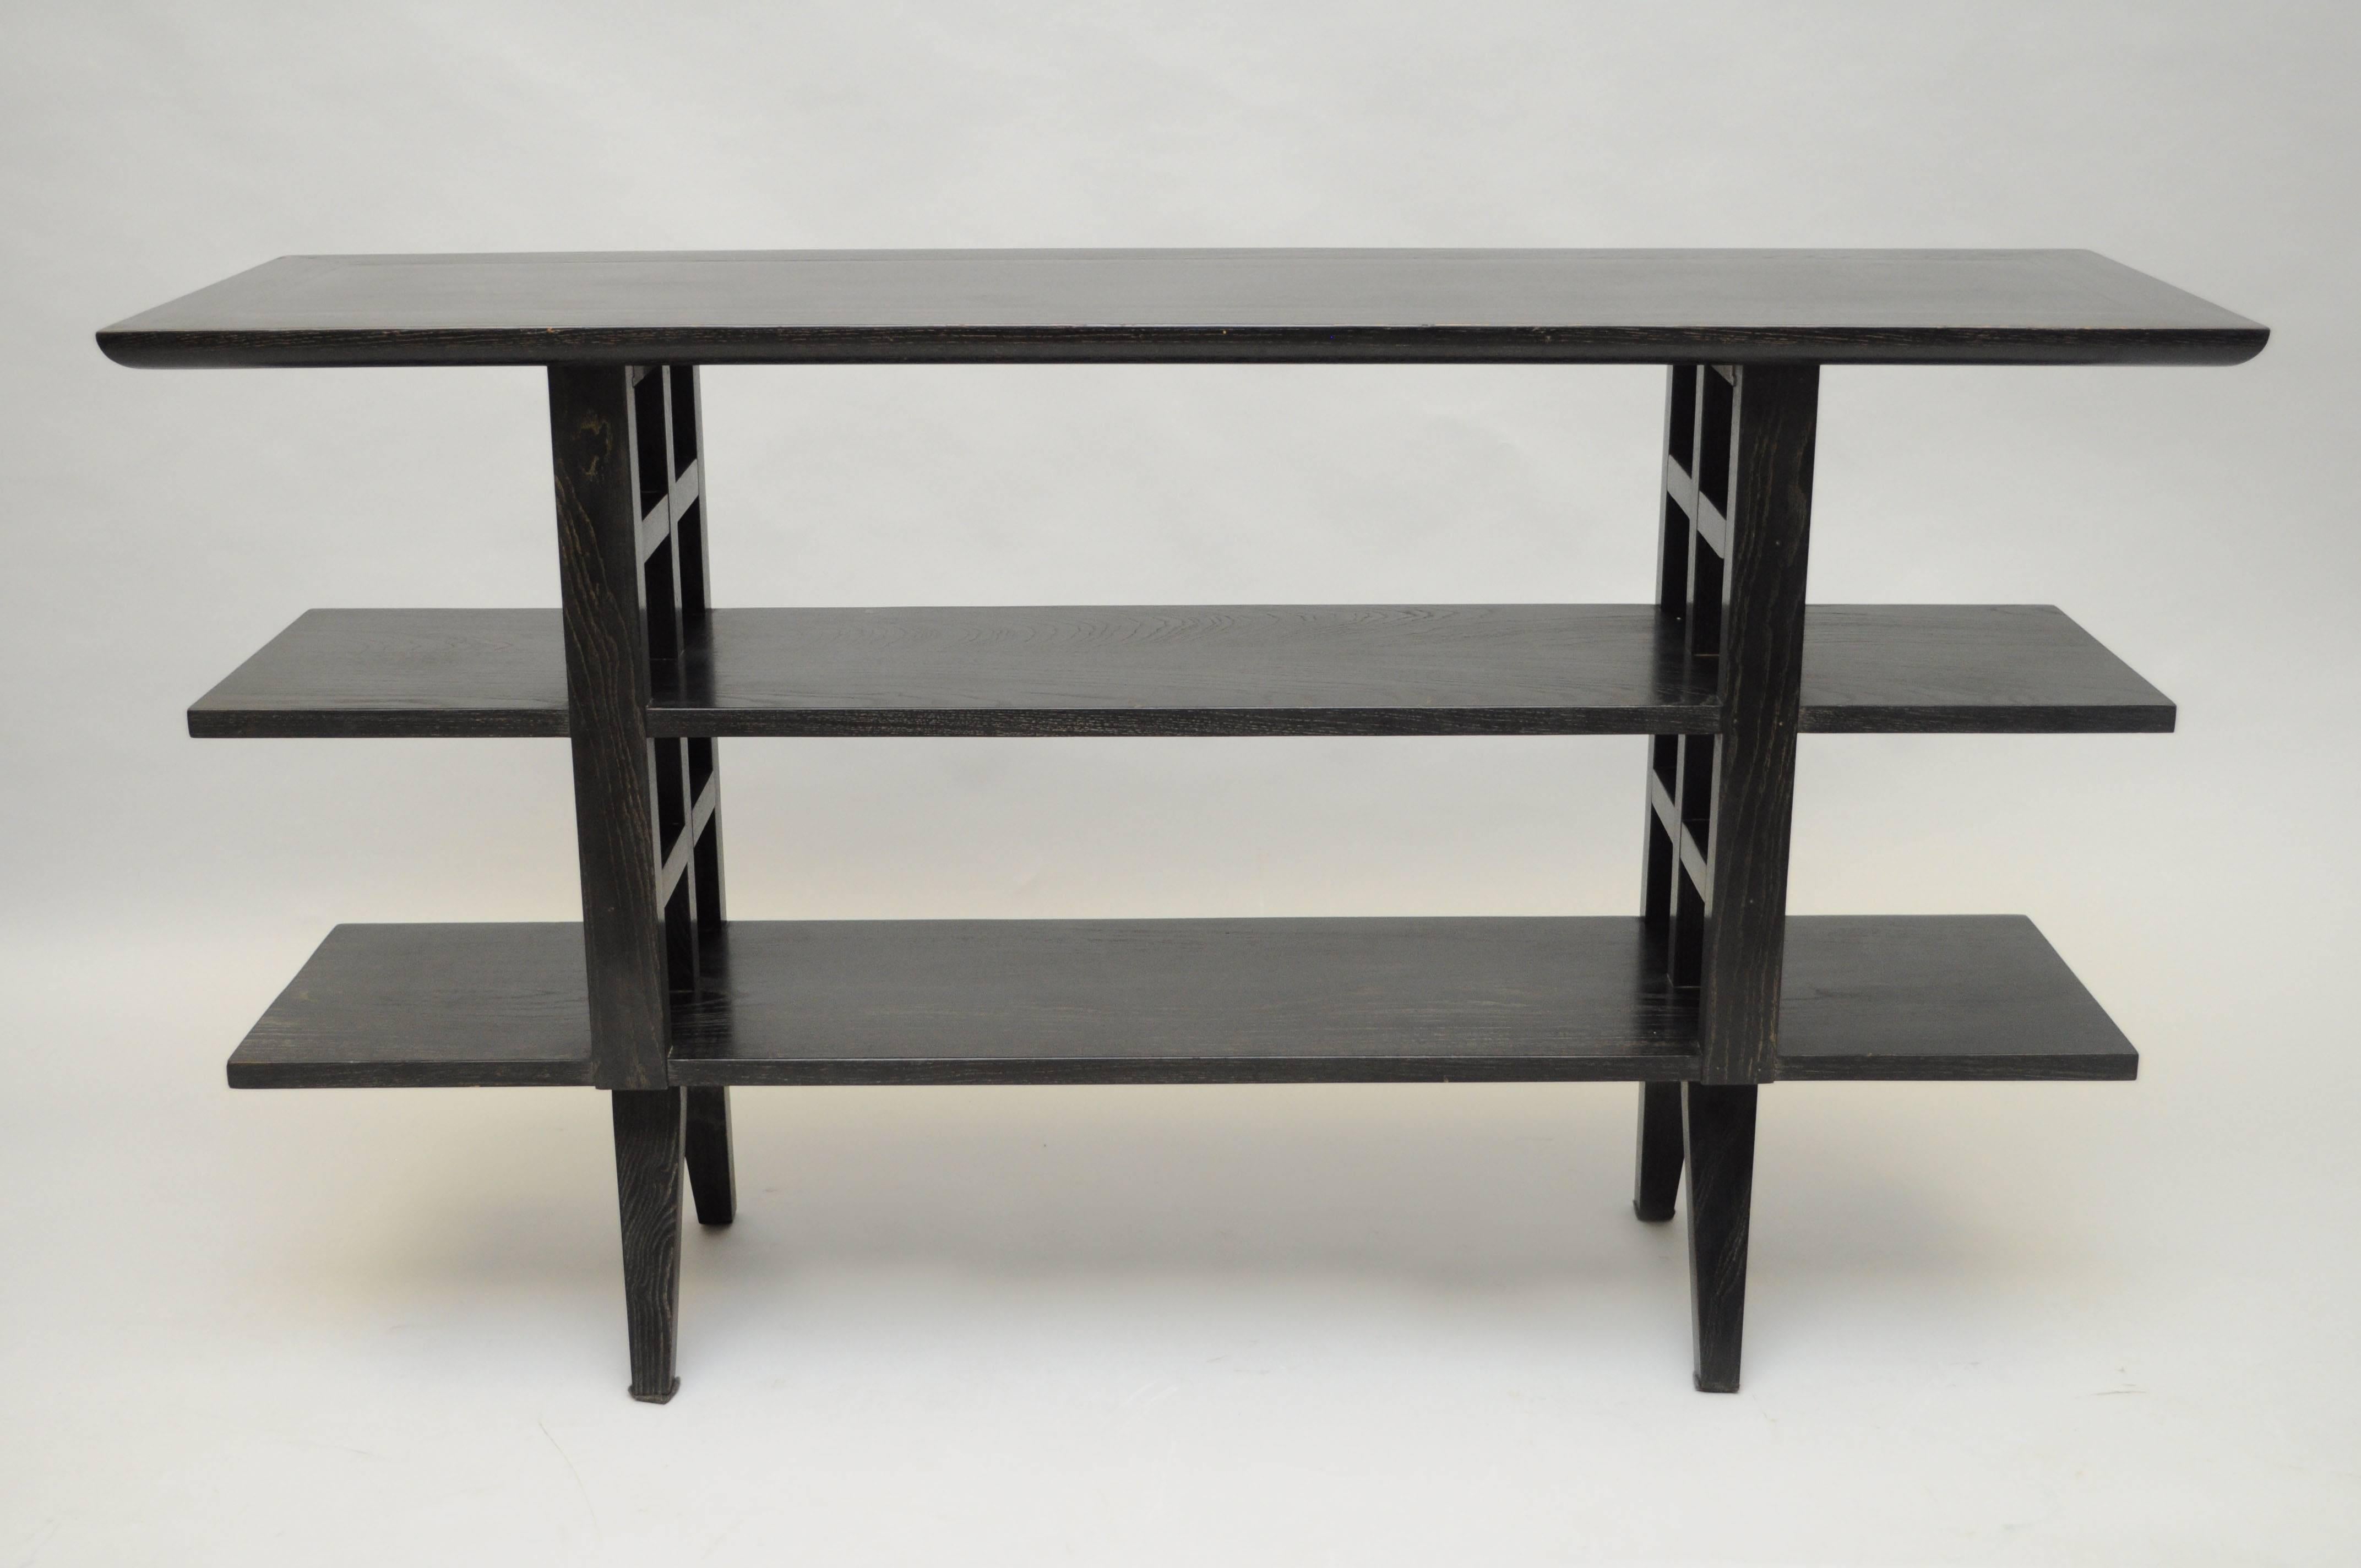 Vintage Mid-Century Modern, Asian inspired, ebonized cerused oak console table by Martin California in the manner of James Mont. Item features beautiful cerused oakwood grain throughout, three bookshelf tiers, lattice cut-out design to the sides,